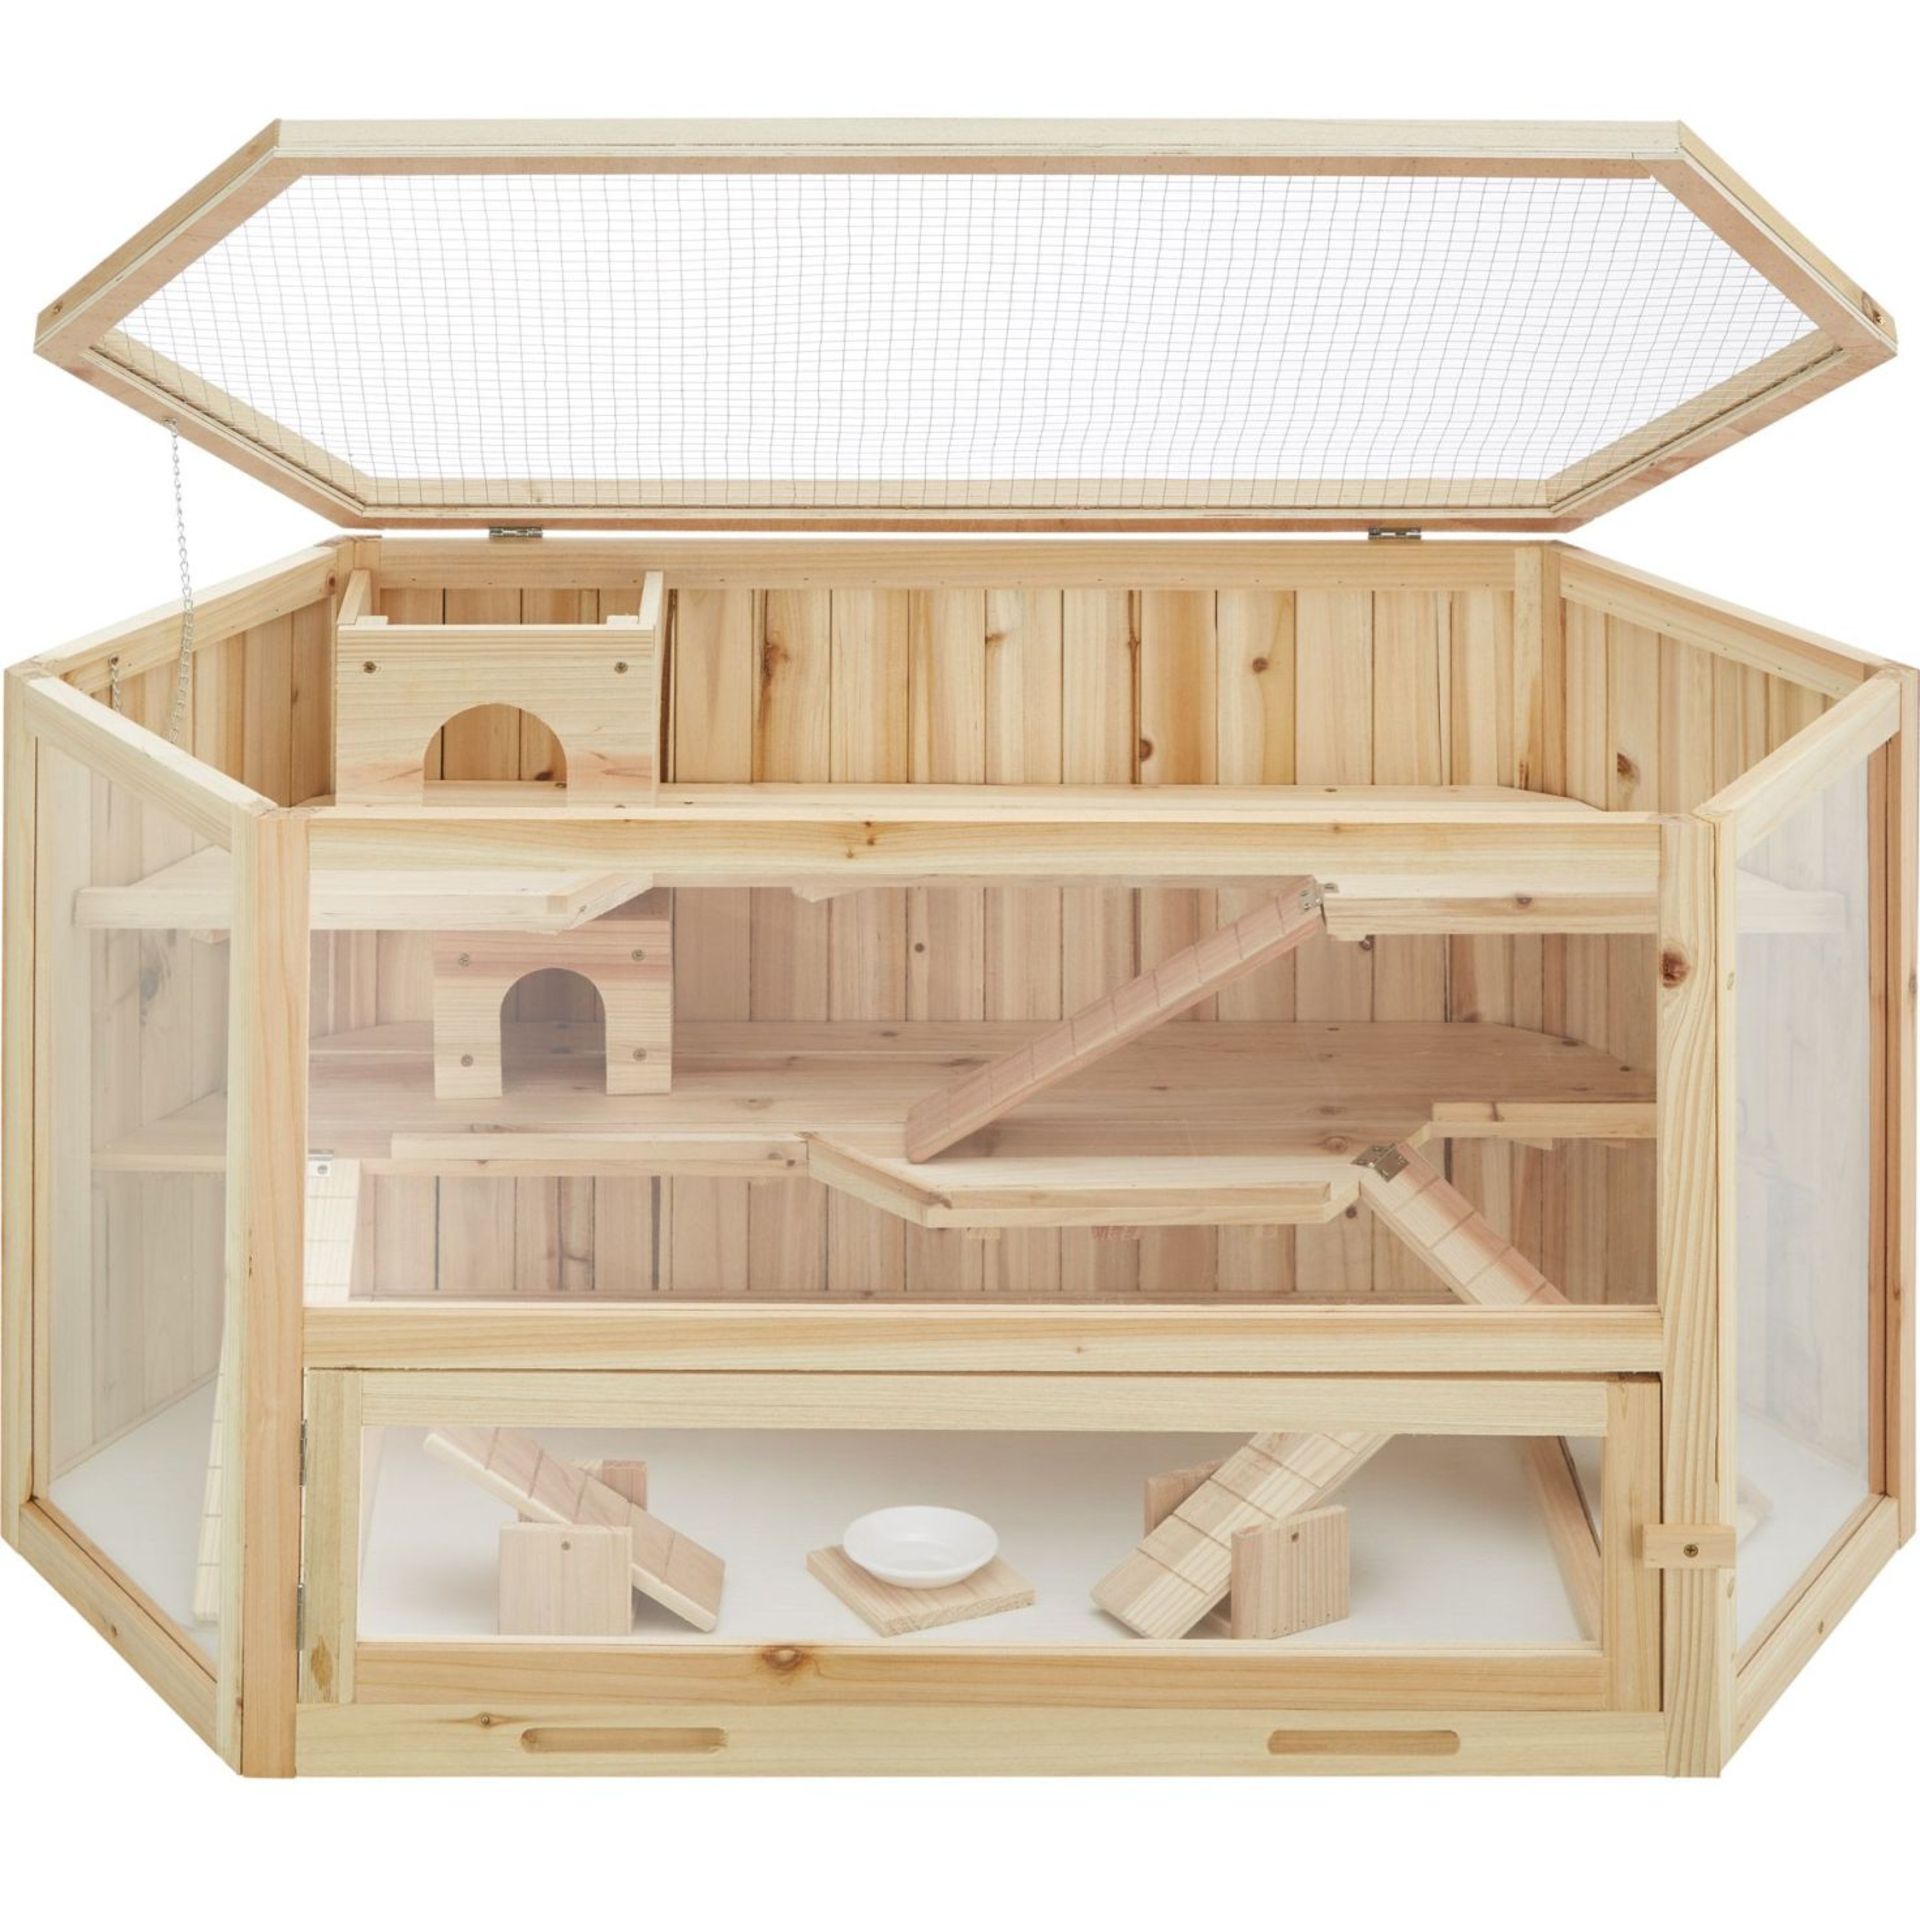 Tectake - Hamster Cage Made Of Wood 115X60X58Cm Brown - Boxed. RRP £89.99 - Image 2 of 2